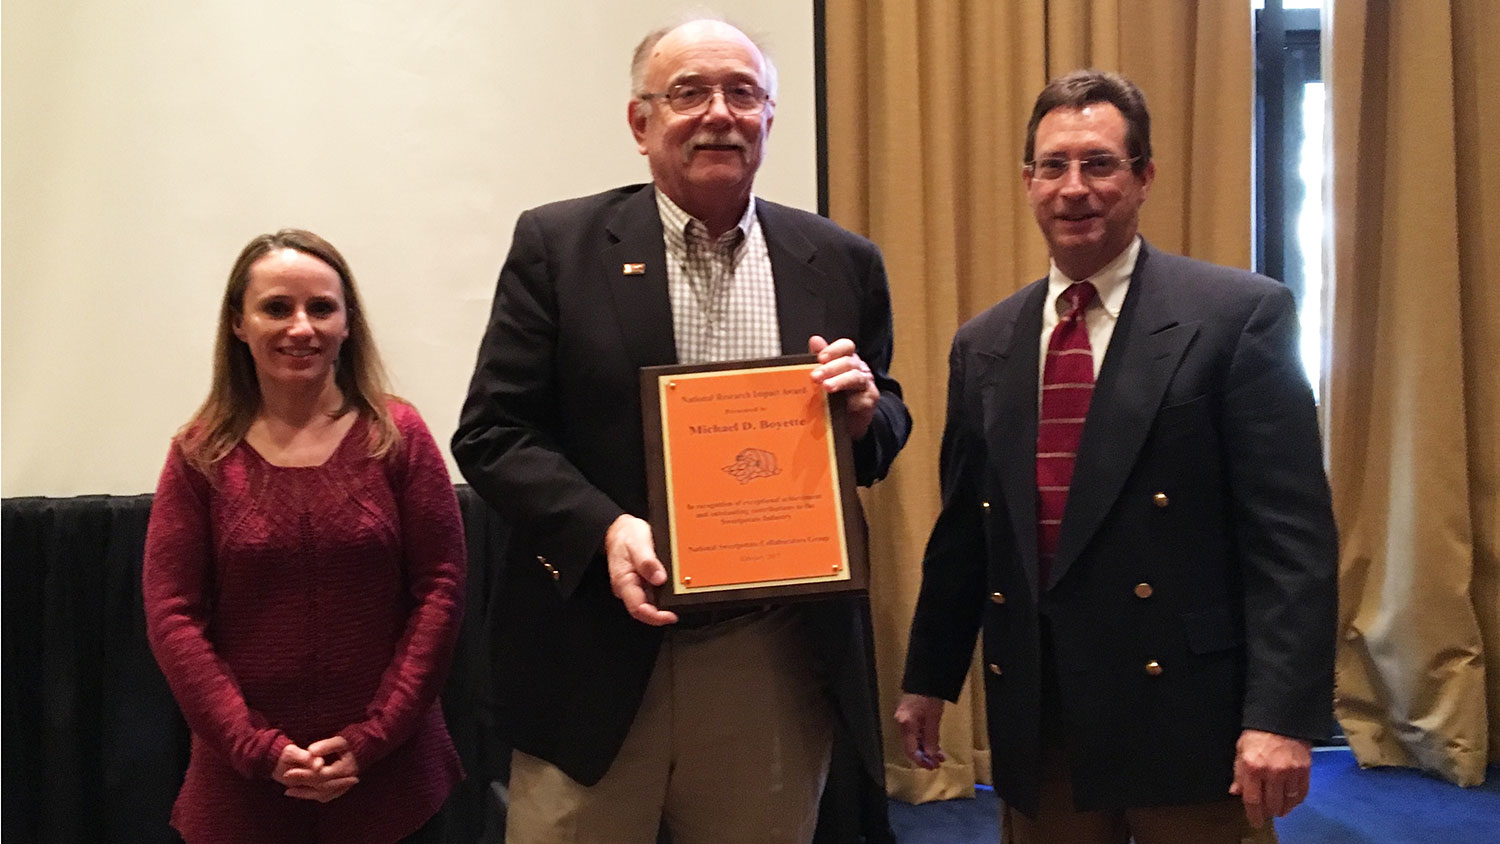 Mike Boyette receives the National Research Impact Award